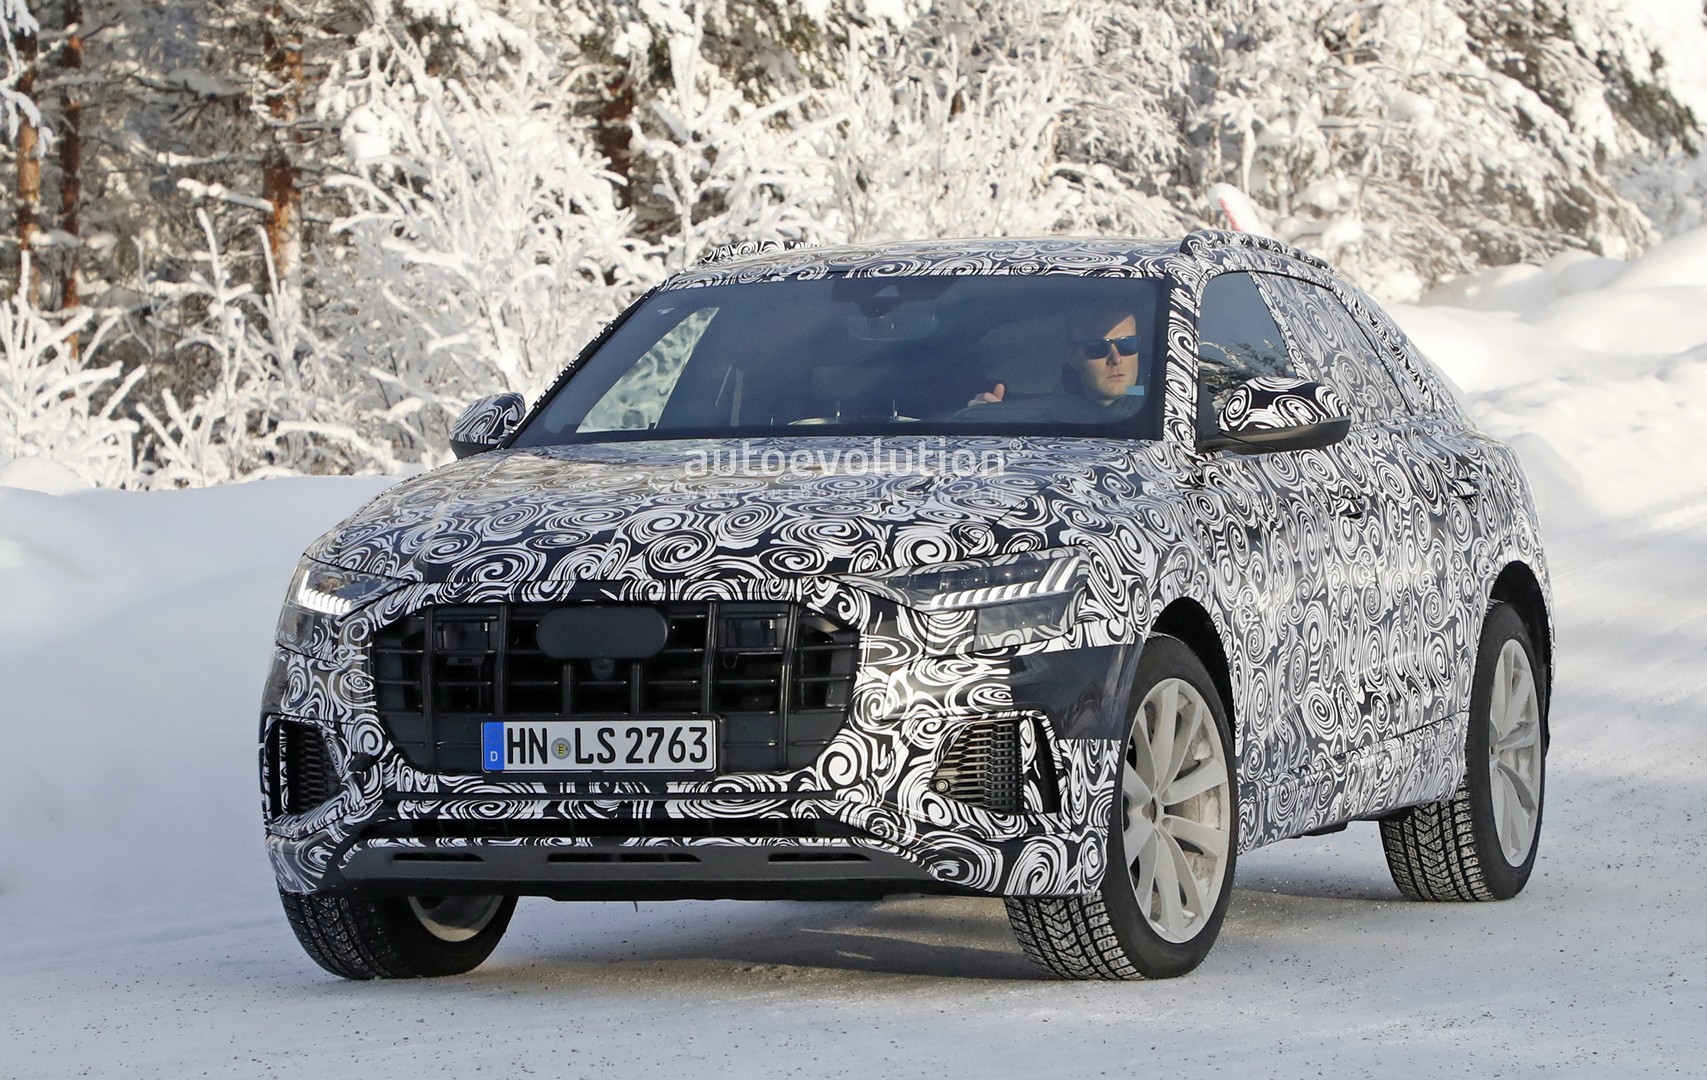 2018 - [Audi] Q8 - Page 6 Audi-sq8-shows-new-headlights-looks-almost-ready-to-debut_2